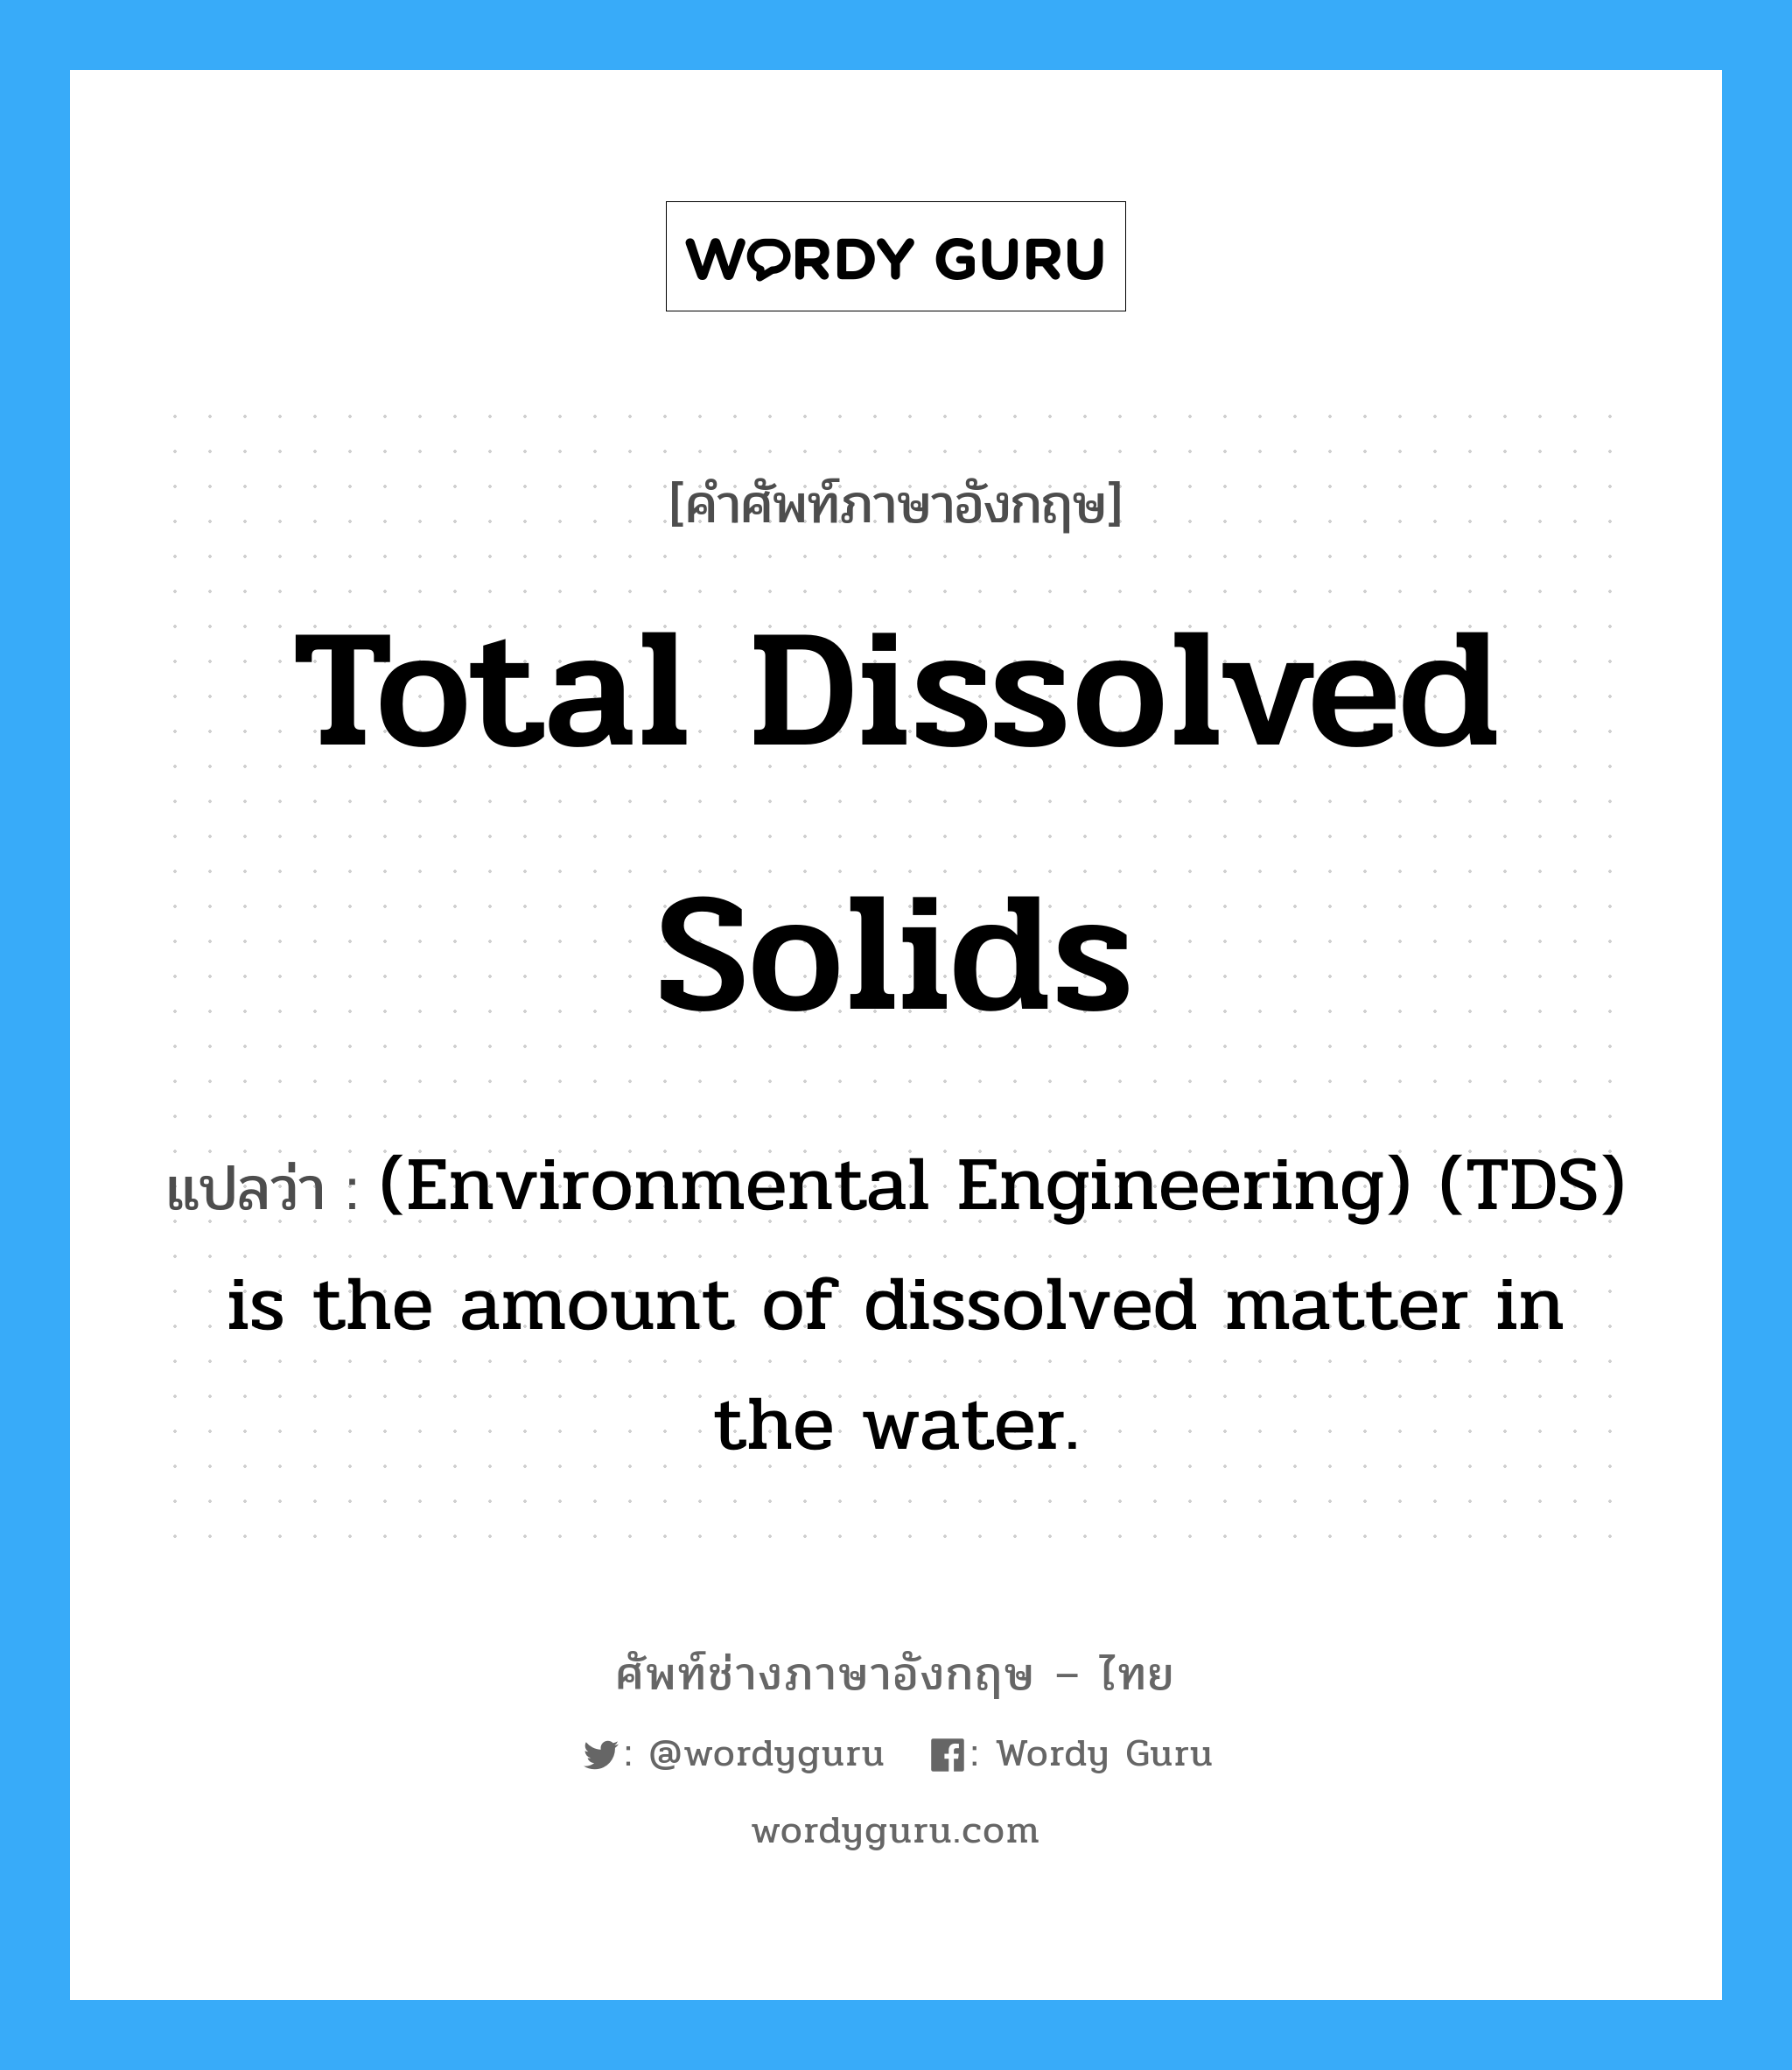 (Environmental Engineering) (TDS) is the amount of dissolved matter in the water. ภาษาอังกฤษ?, คำศัพท์ช่างภาษาอังกฤษ - ไทย (Environmental Engineering) (TDS) is the amount of dissolved matter in the water. คำศัพท์ภาษาอังกฤษ (Environmental Engineering) (TDS) is the amount of dissolved matter in the water. แปลว่า Total dissolved solids